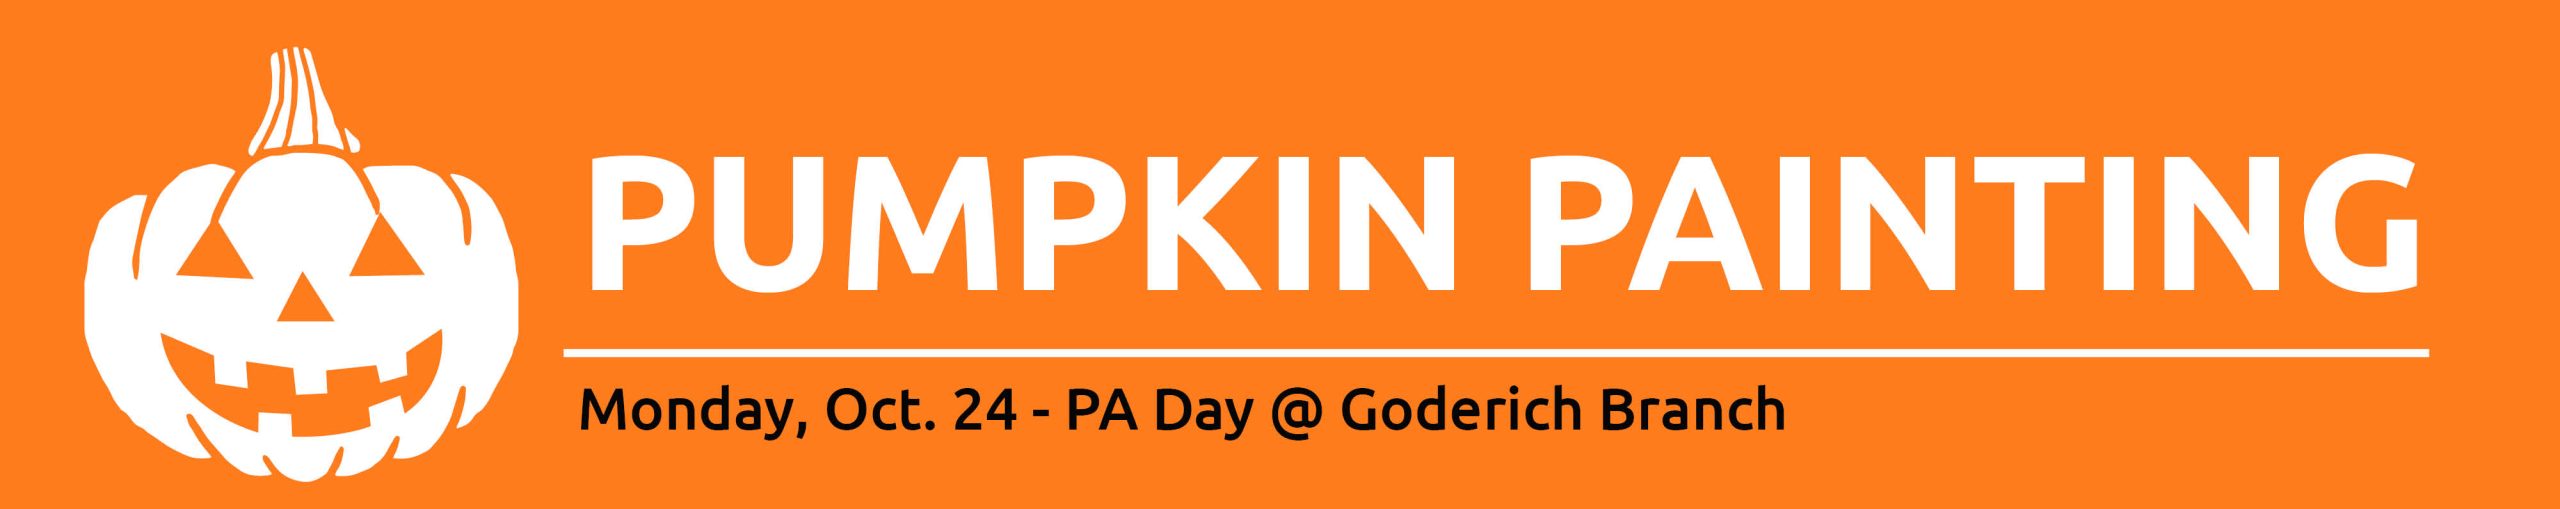 Illustration of a pumpkin with text promoting pa day activity at Goderich